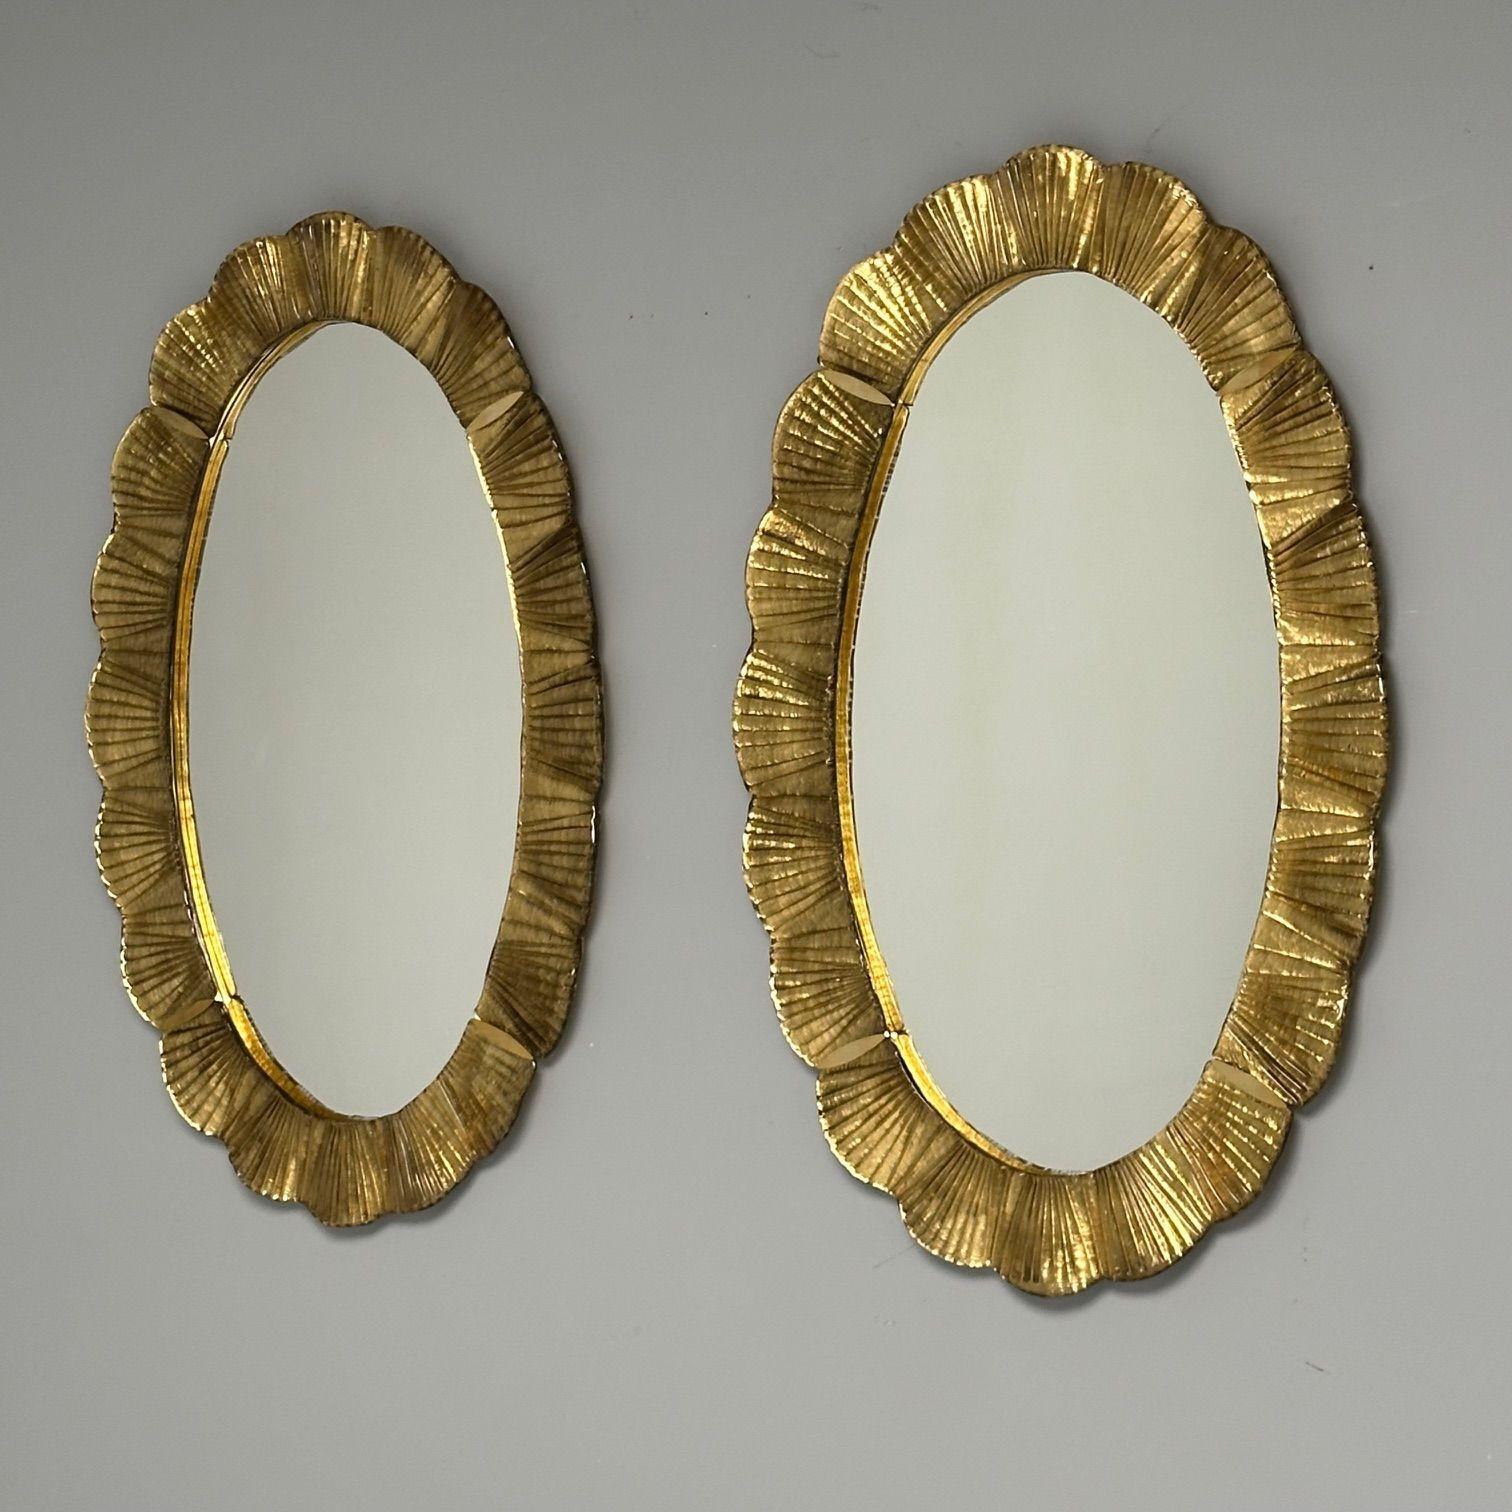 Contemporary, Oval Wall Mirrors, Scallop Motif, Murano Glass, Gilt Gold, Italy For Sale 1